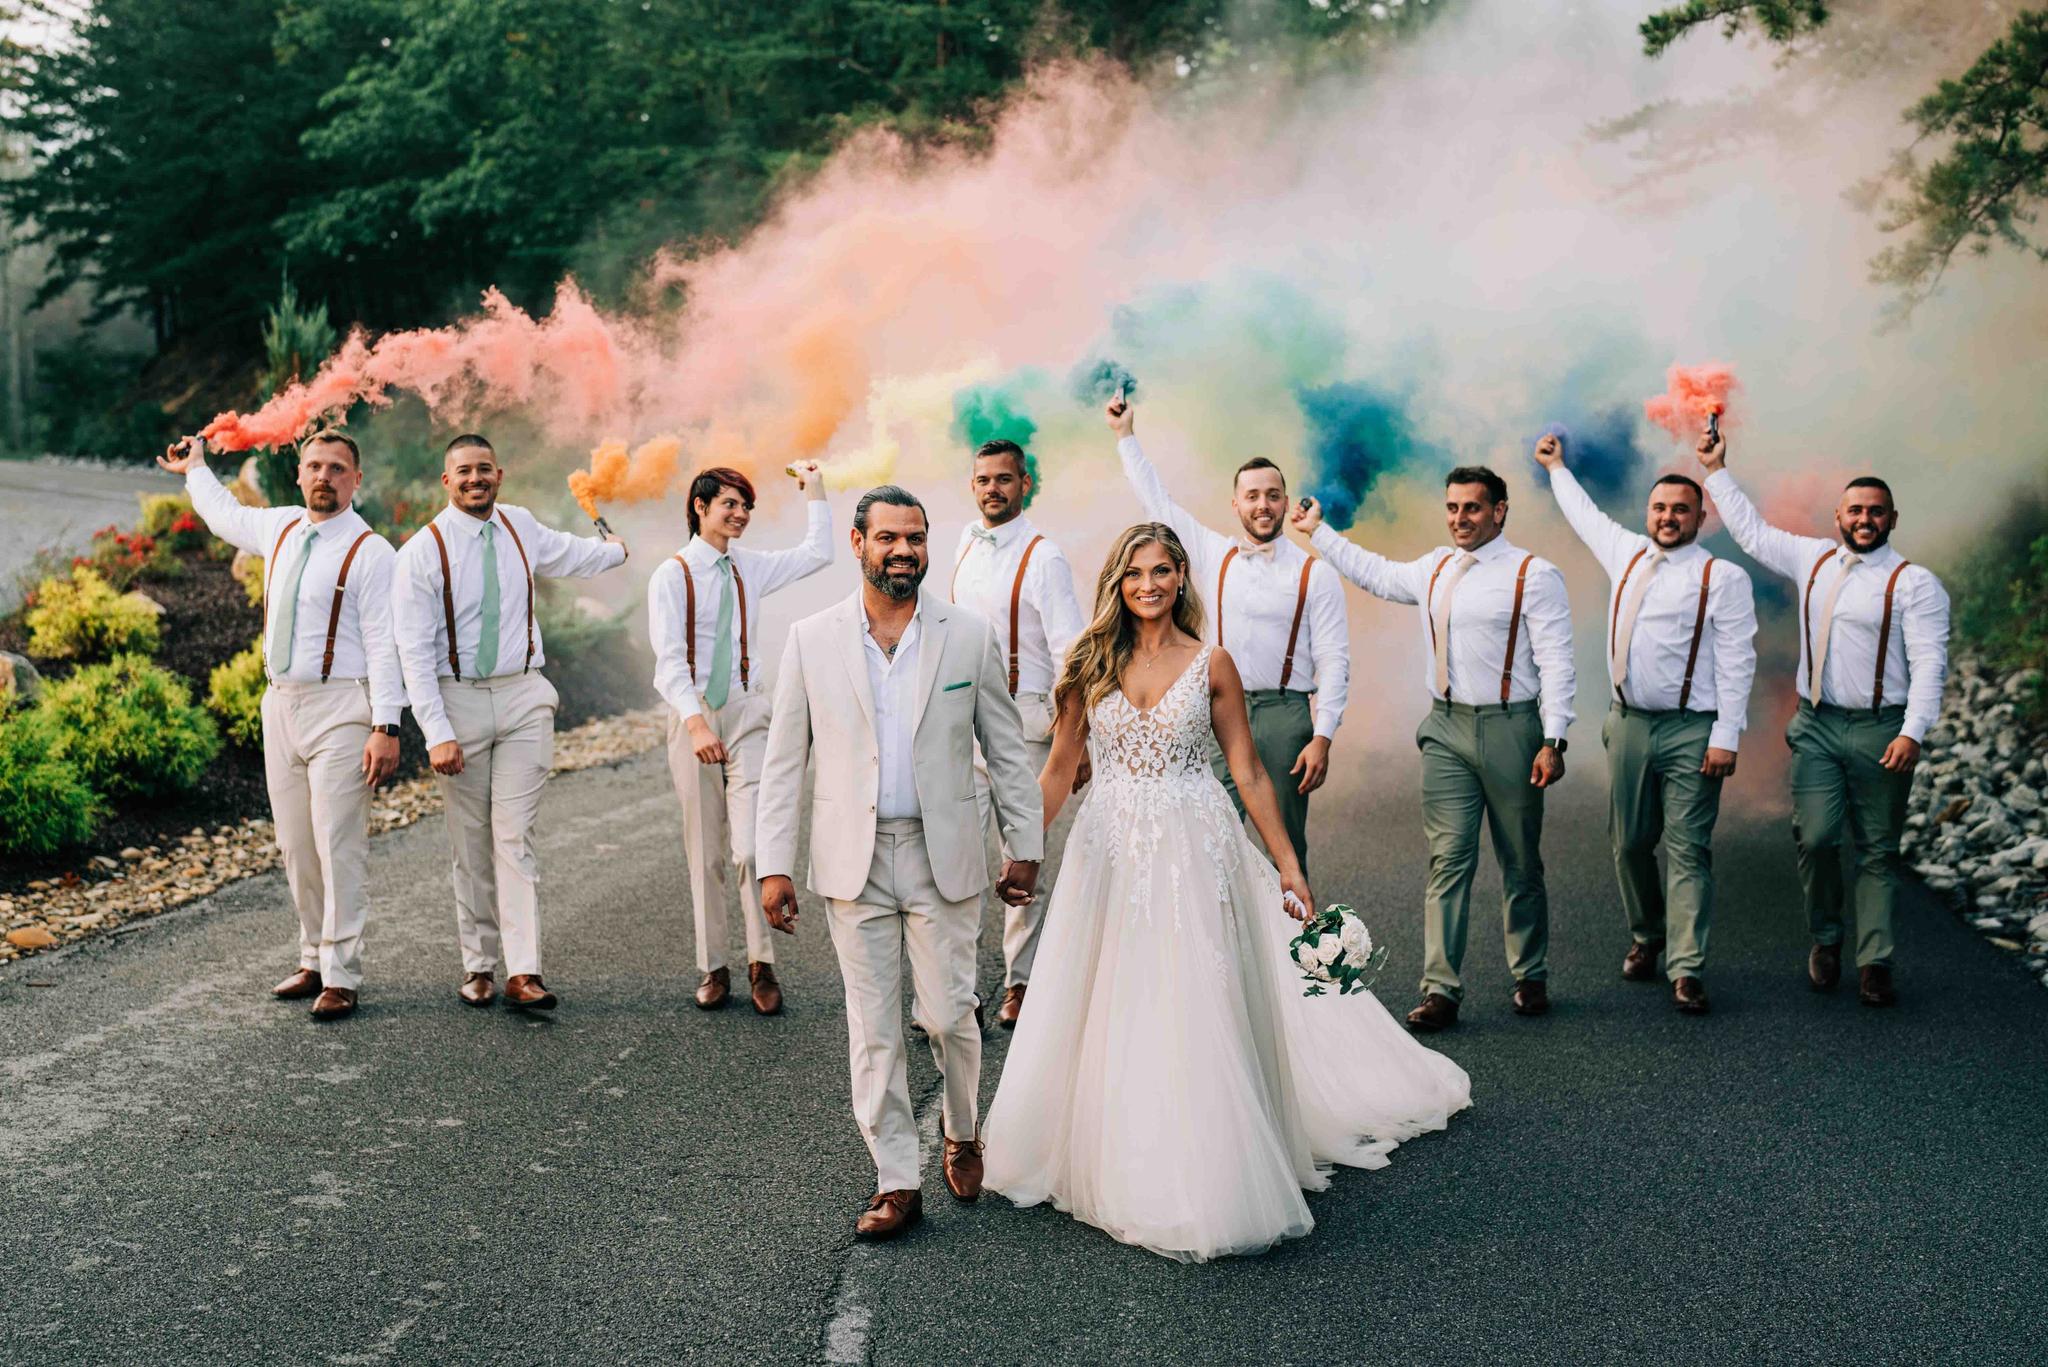 Amanda & Ian's Enchanting Airbnb Wedding in the foothills of   the Smoky Mountains